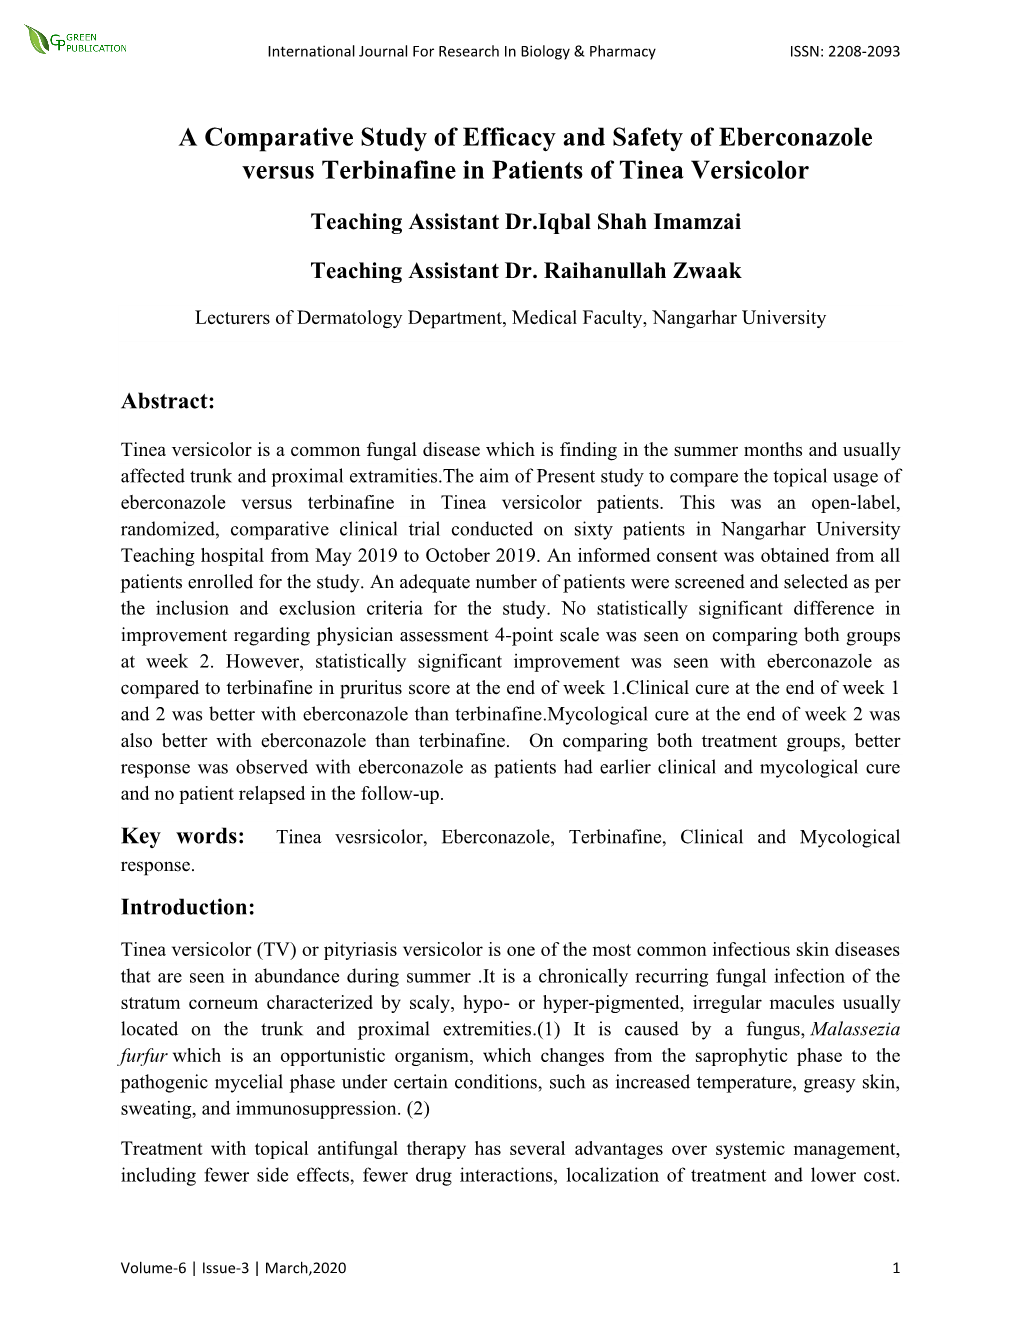 A Comparative Study of Efficacy and Safety of Eberconazole Versus Terbinafine in Patients of Tinea Versicolor